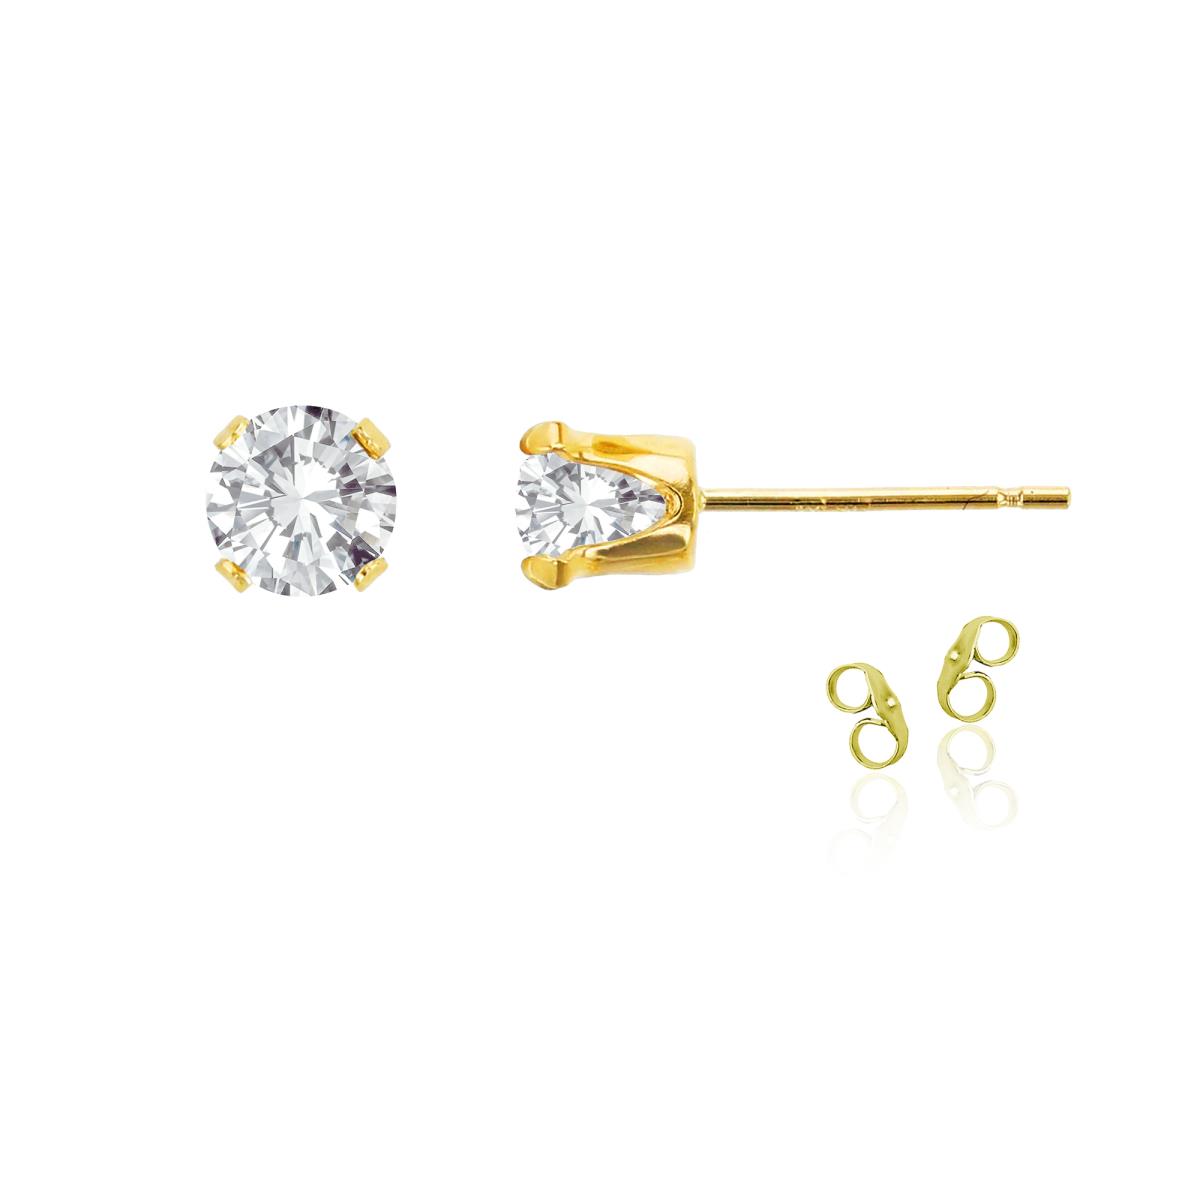 Sterling Silver Yellow 7mm Round White Topaz Stud Earring with Clutch